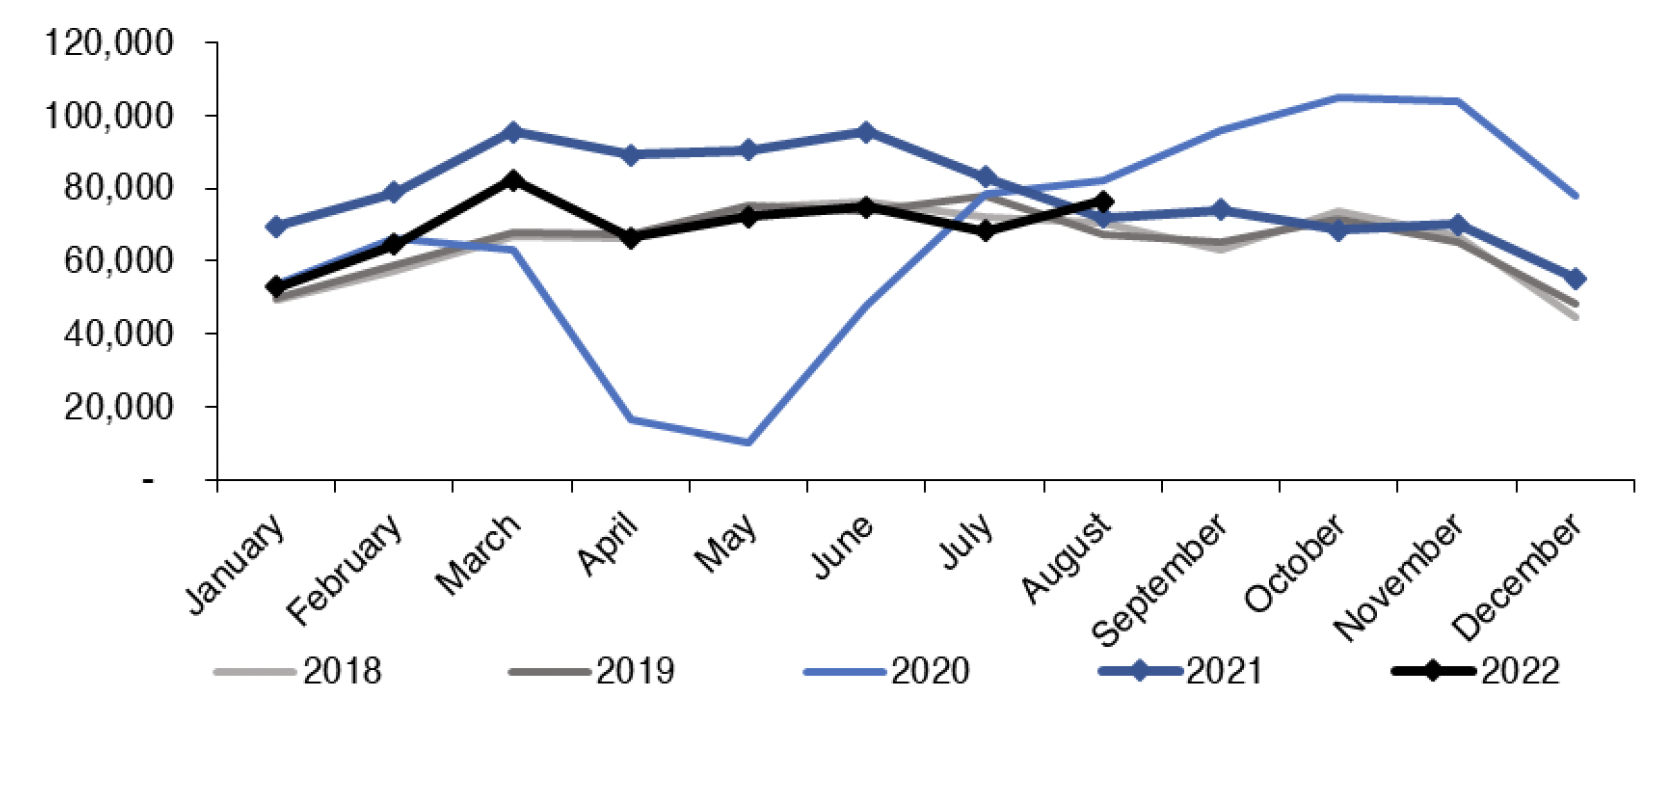 Chart 5.2 outlines how the monthly number of mortgage approvals for house purchase in the UK has changed over time, with the data covering the period from January 2018 to August 2022. 